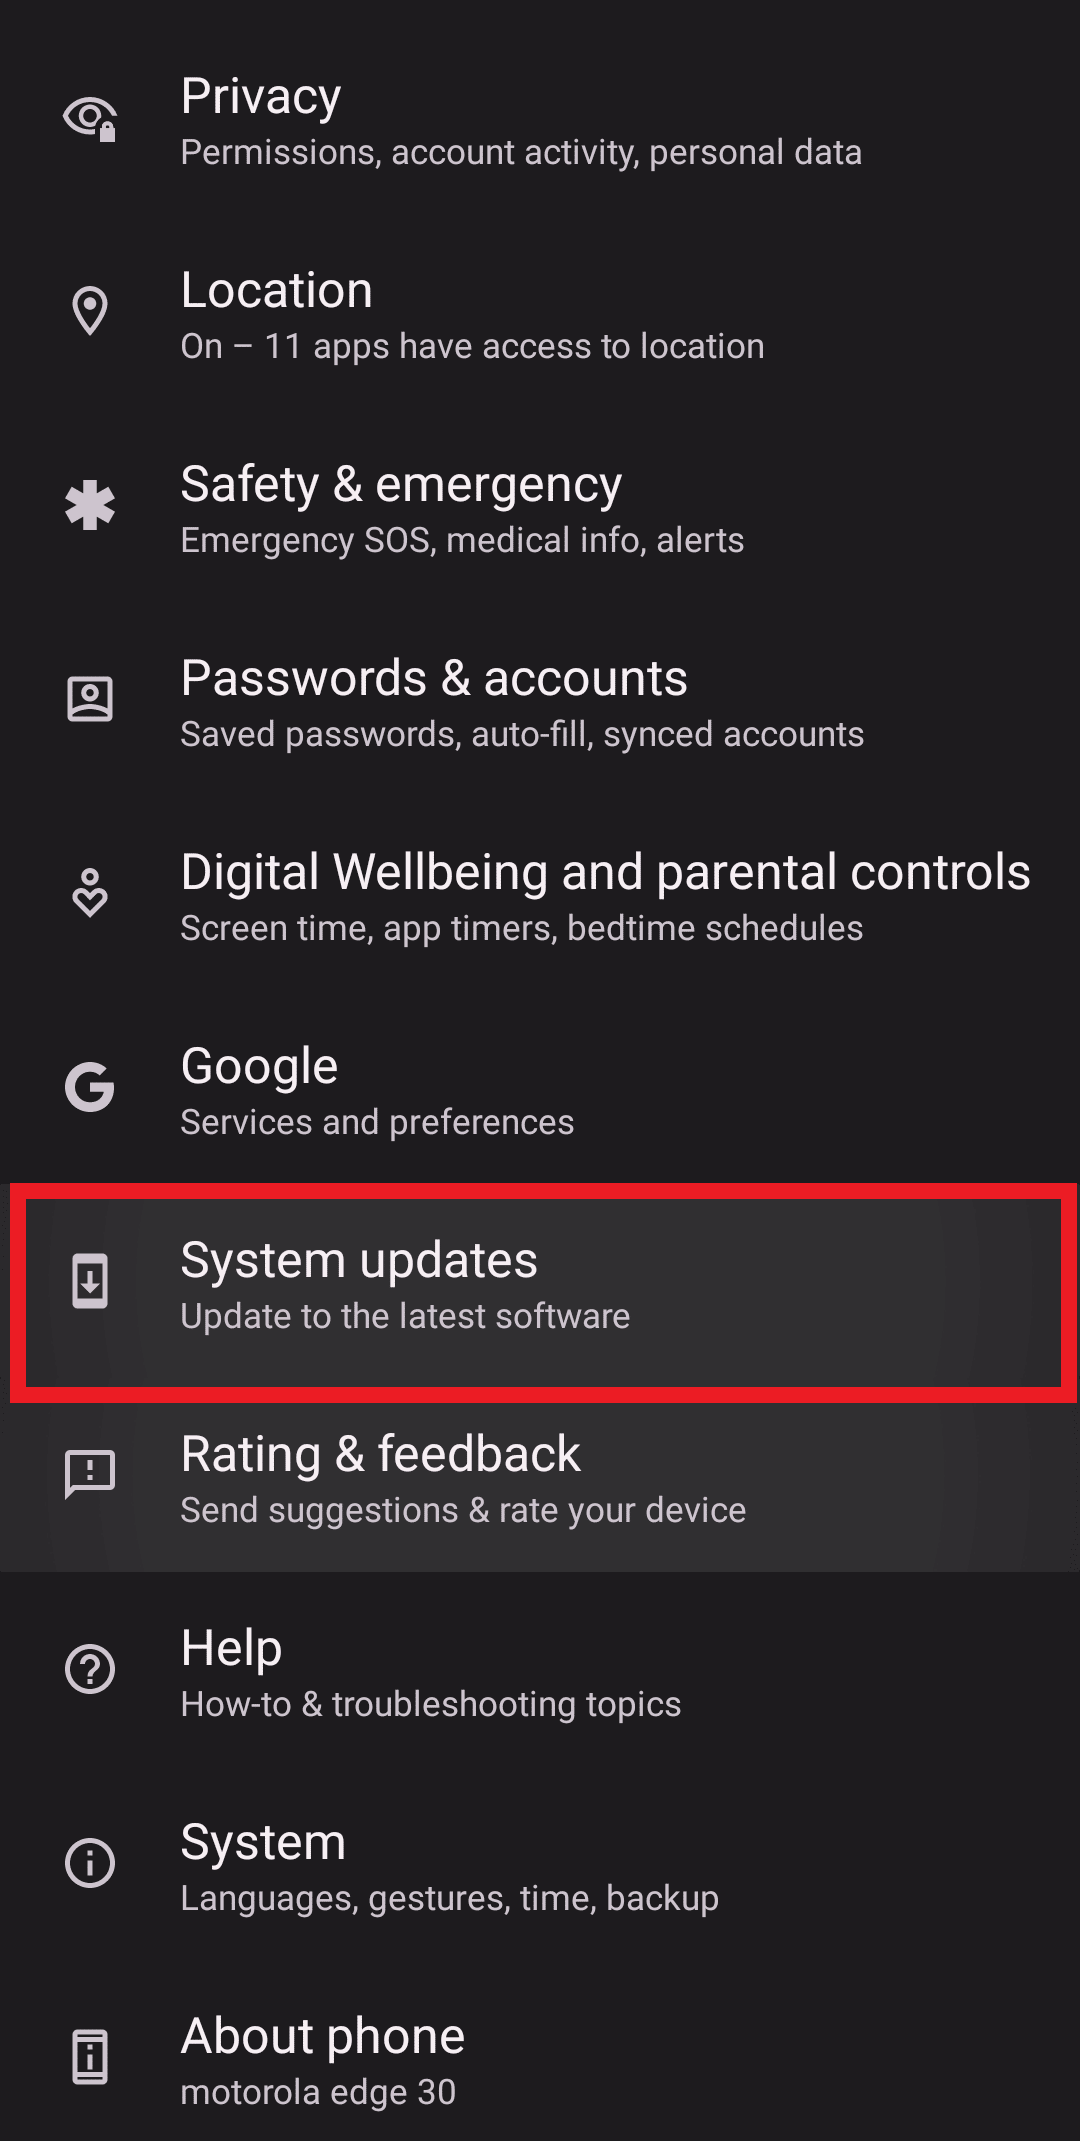 Tap on System updates